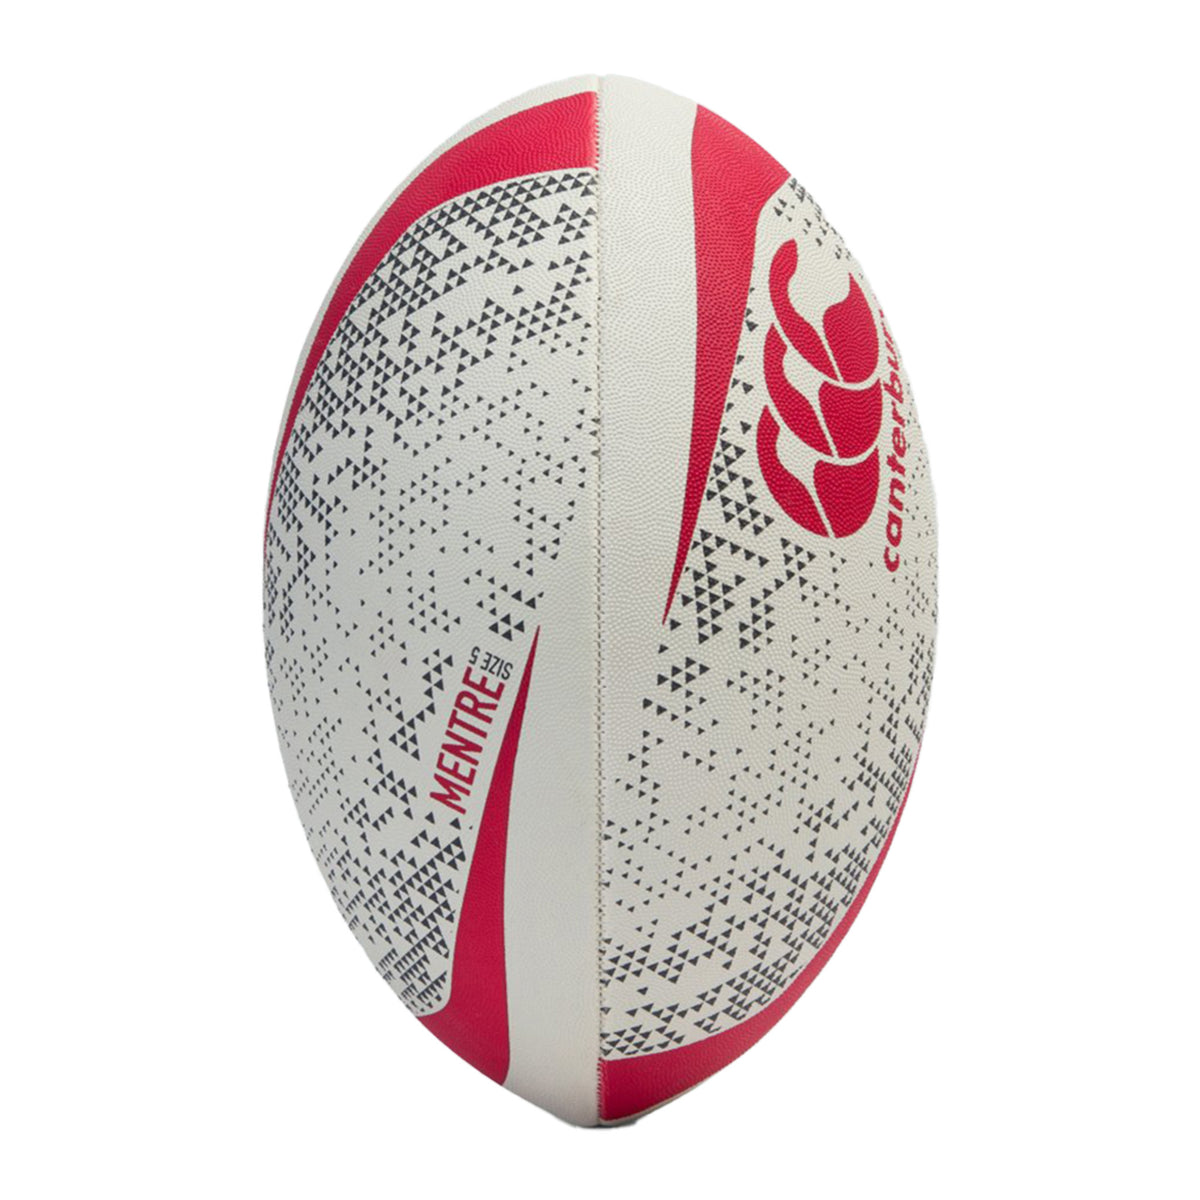 Canterbury-Mentre-Training-RugbyBall-TheRugbyShop